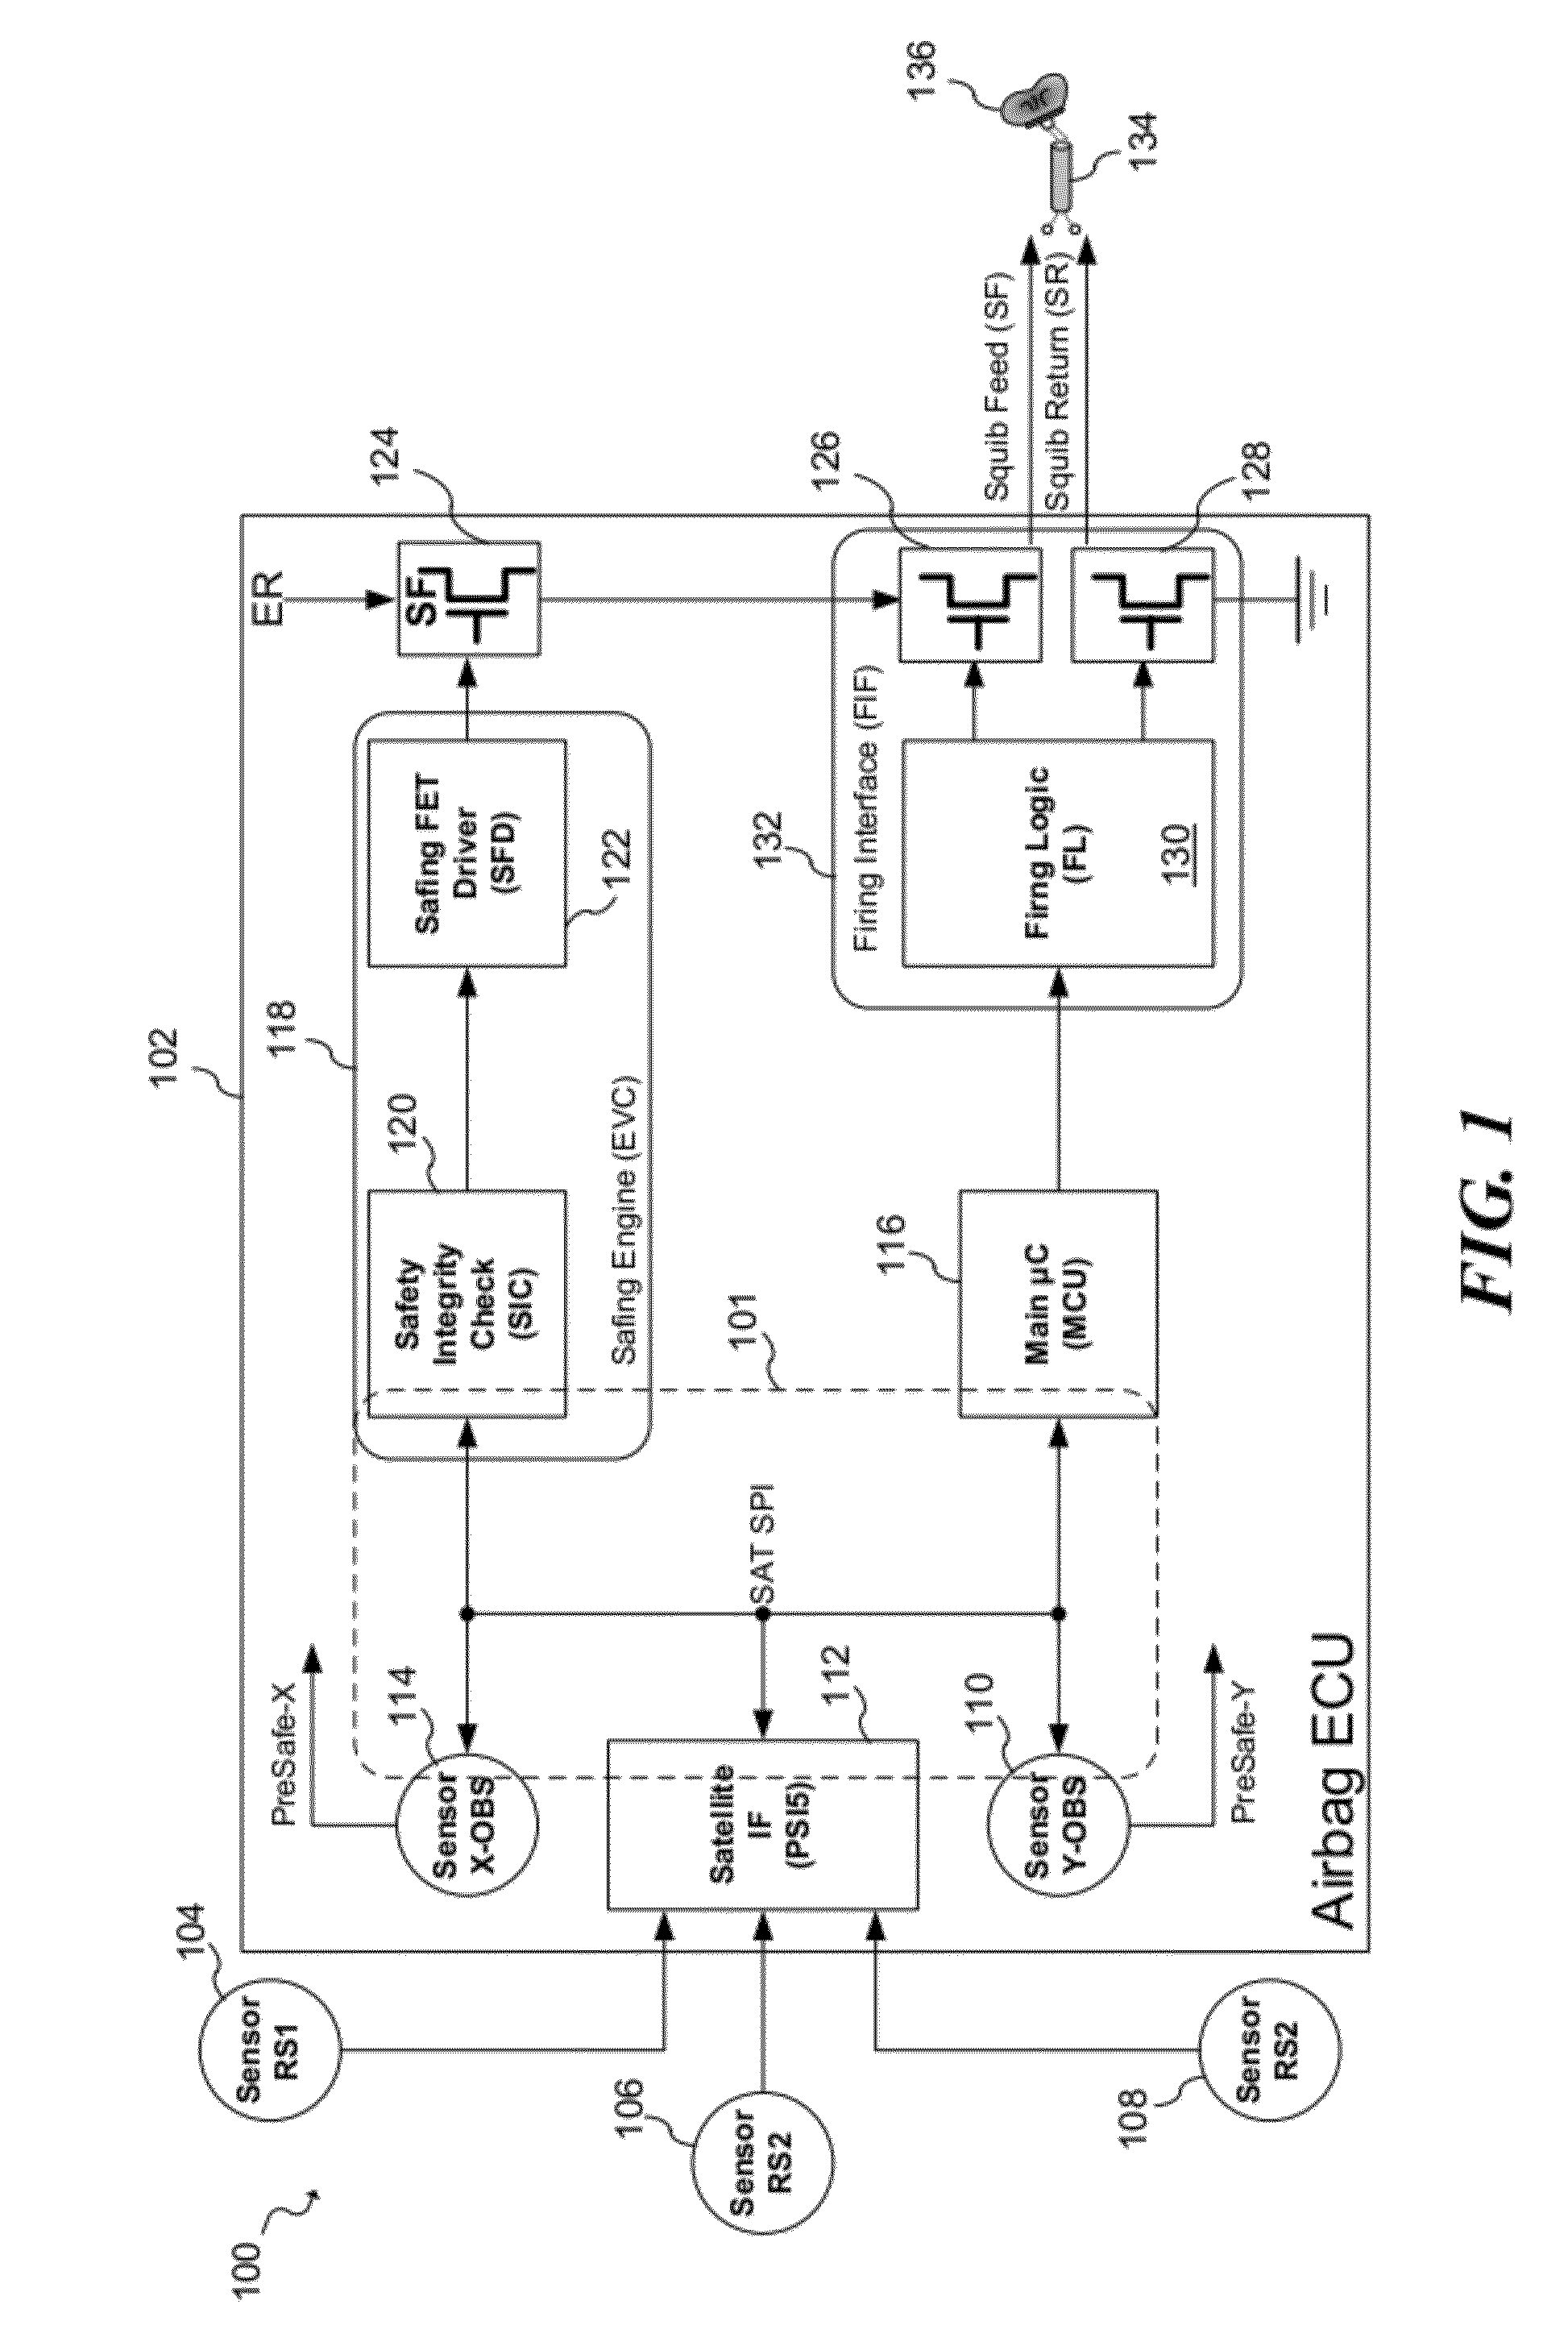 System and Method for Bit Error Rate Monitoring